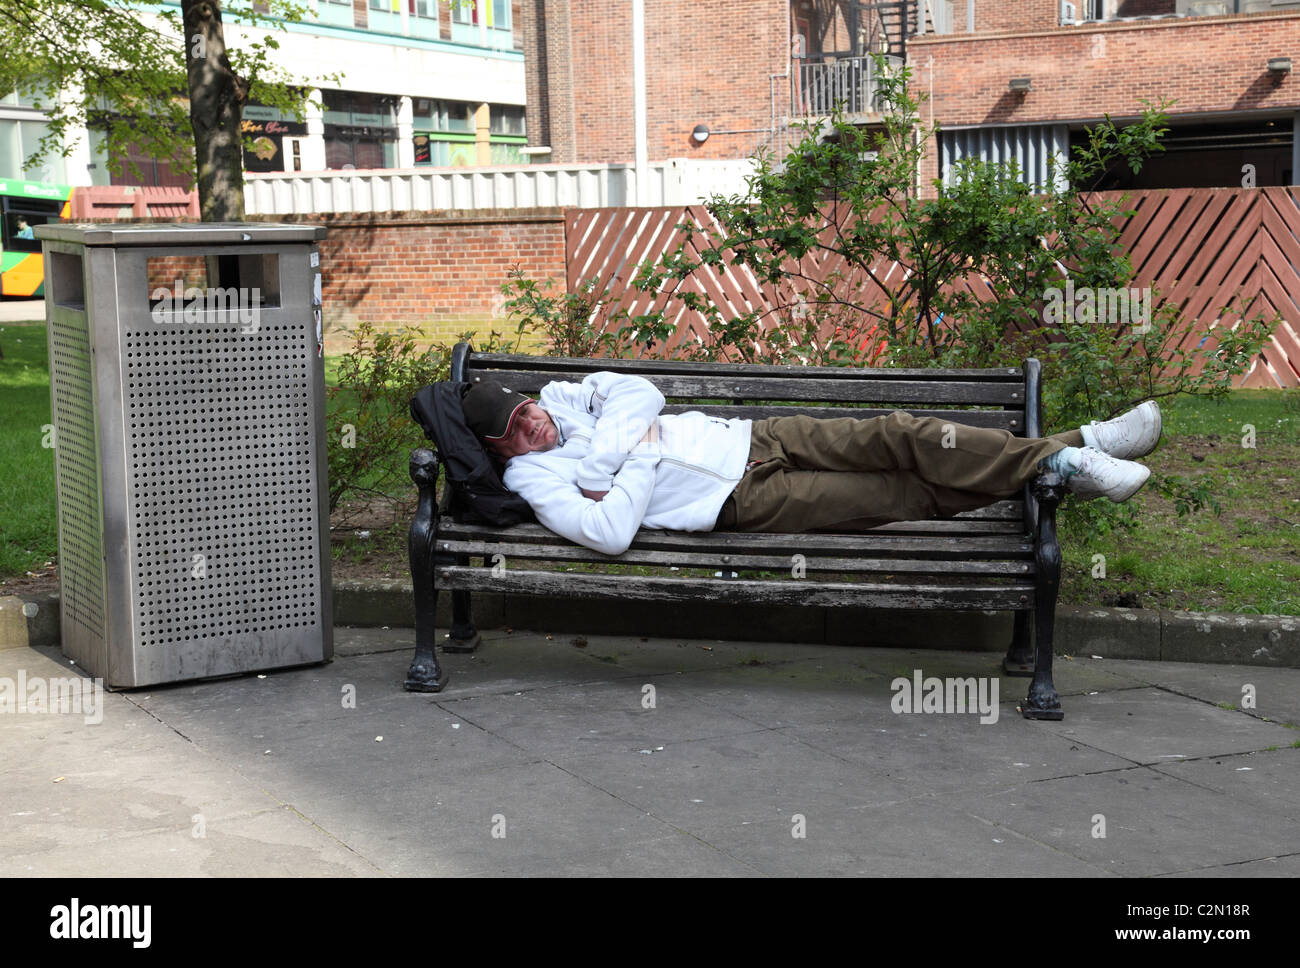 A man asleep on a bench in a U.K. city. Stock Photo